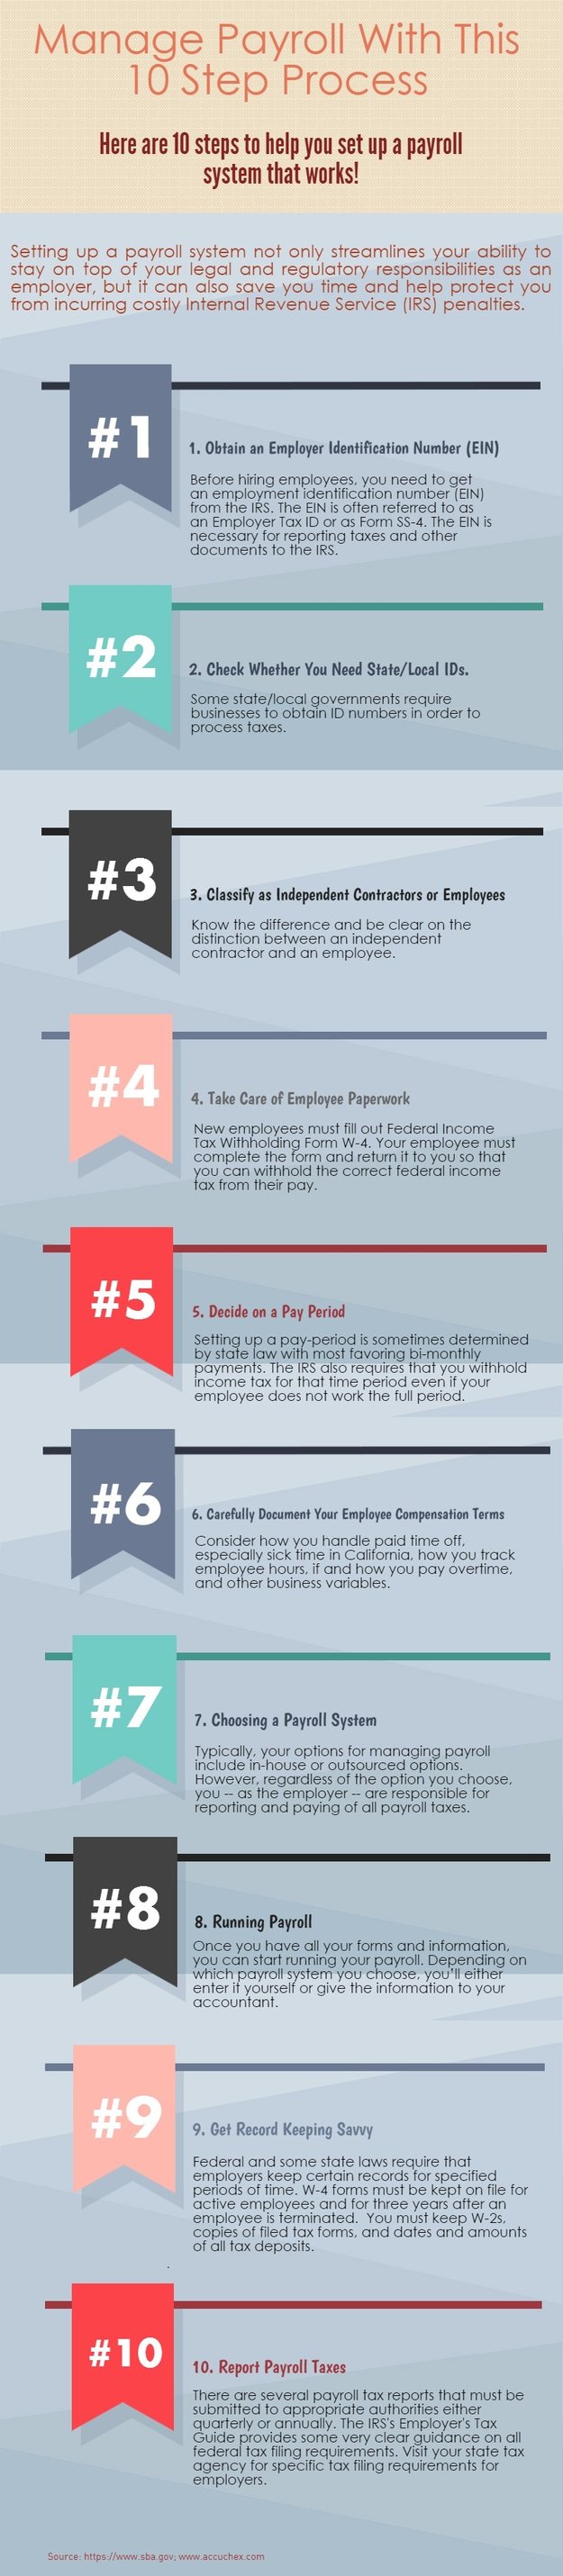 10-steps-to-a-better-managed-payroll-process-infographic